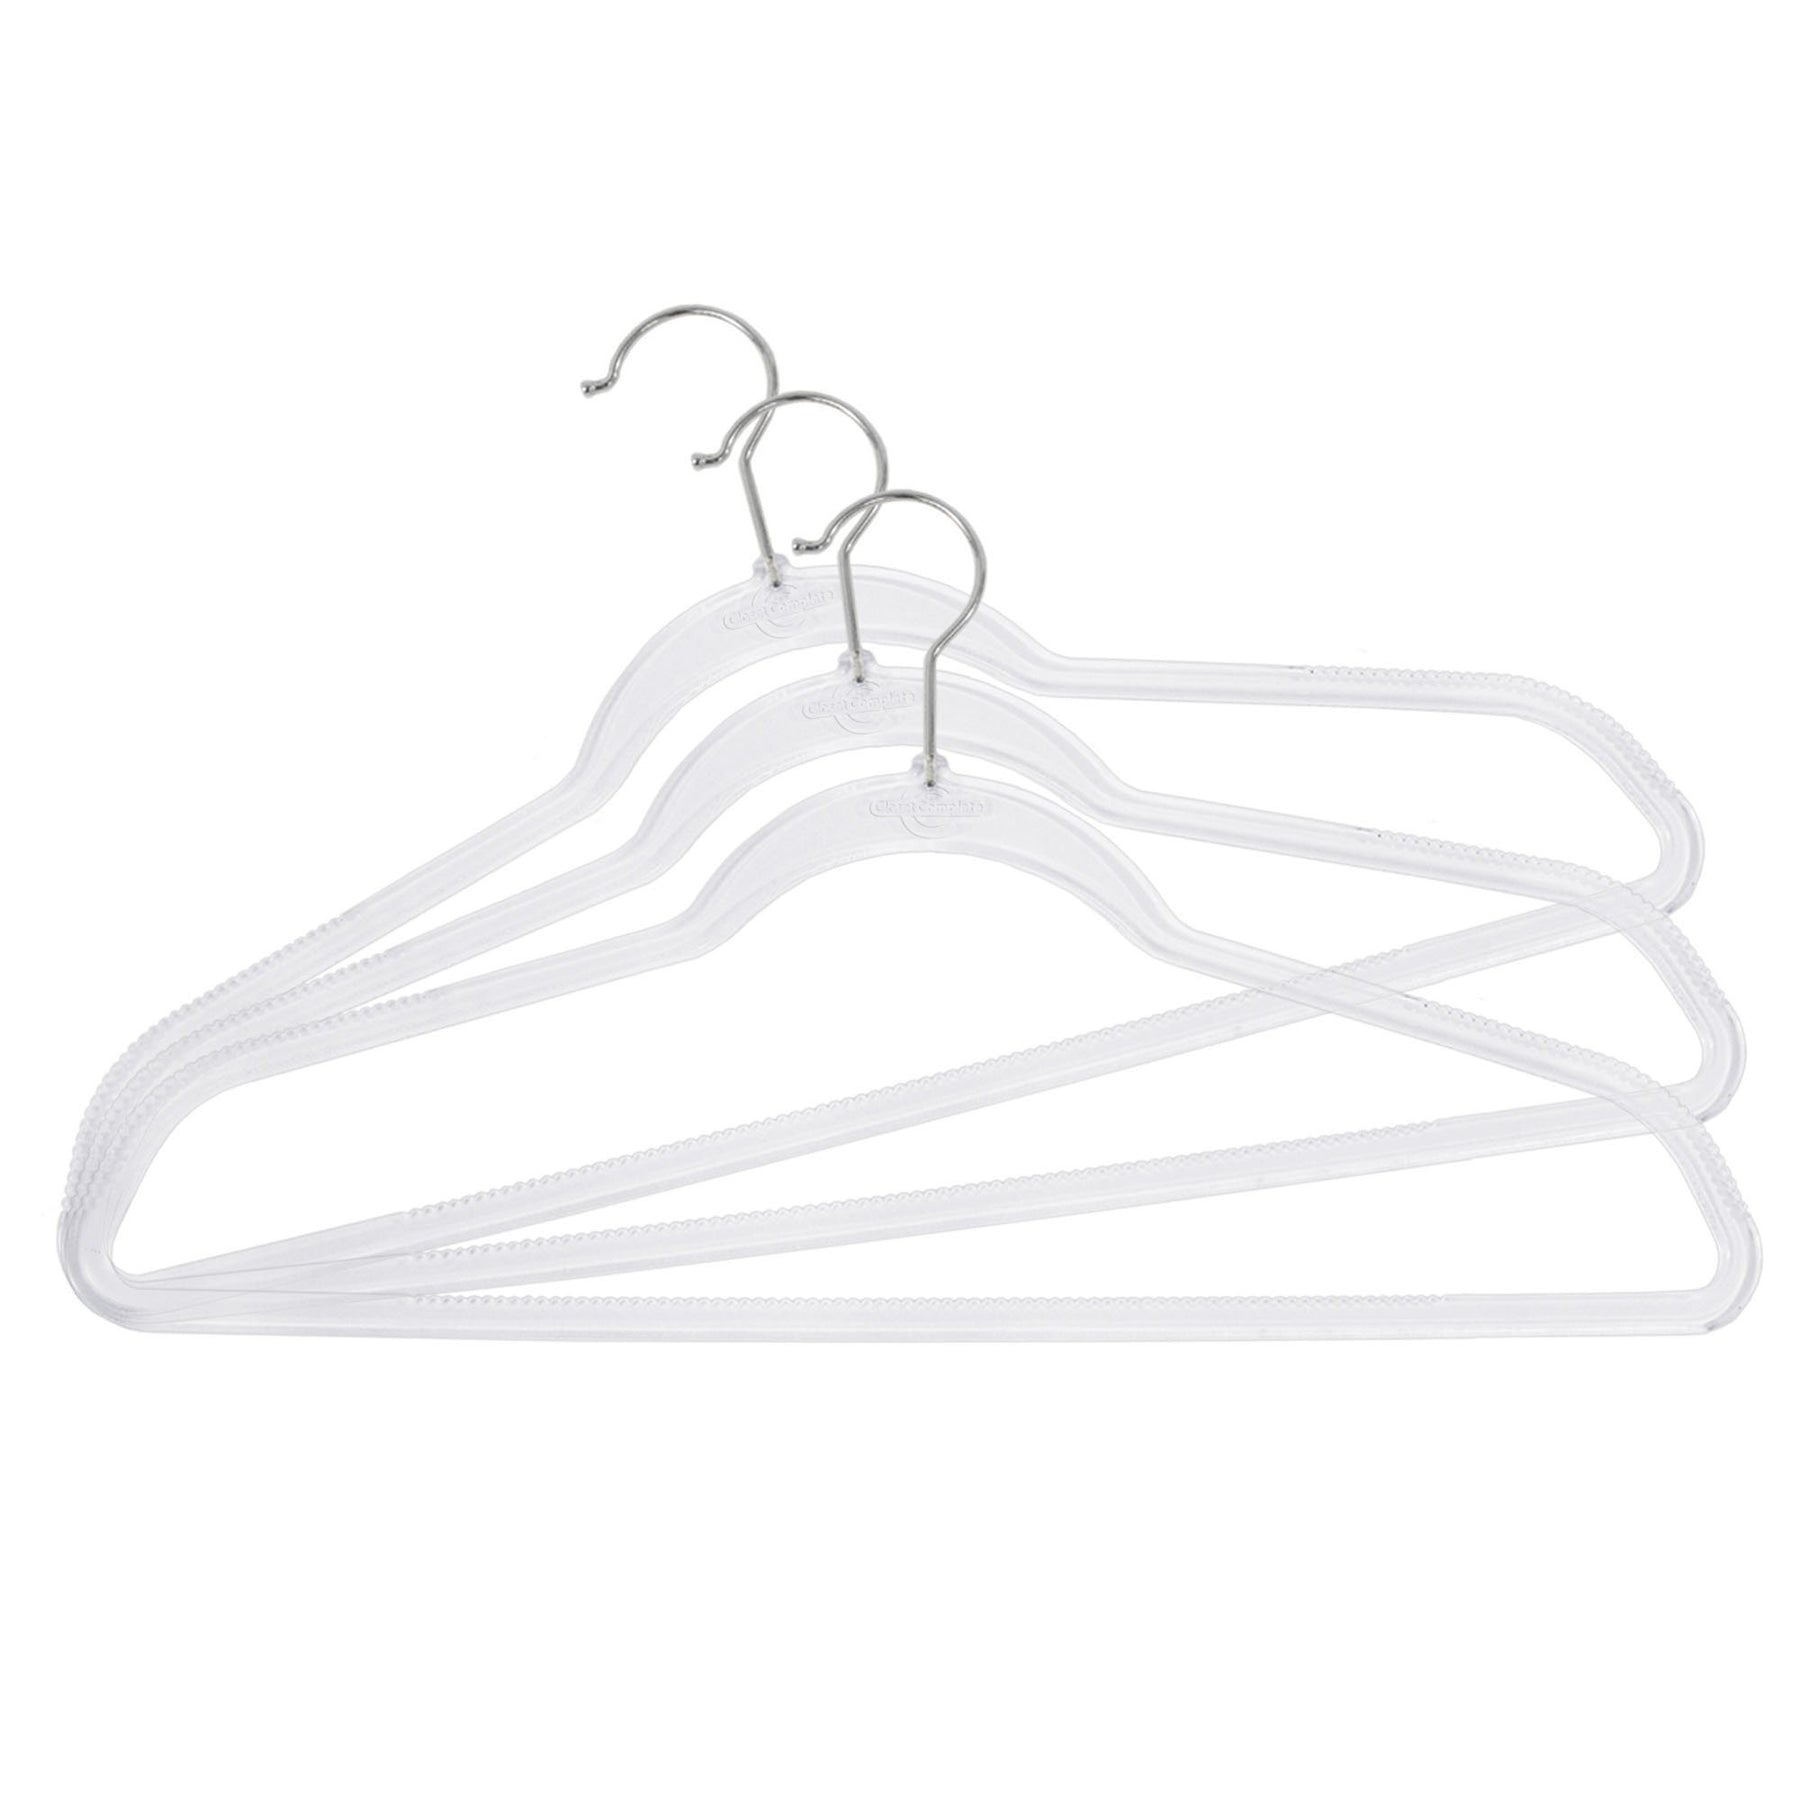 https://cdn.shopify.com/s/files/1/2993/5404/products/closet-complete-acrylic-hangers-completely-clear-non-slip-invisible-acrylic-hangers-69194s-7162750861397_1800x1800.jpg?v=1552517801